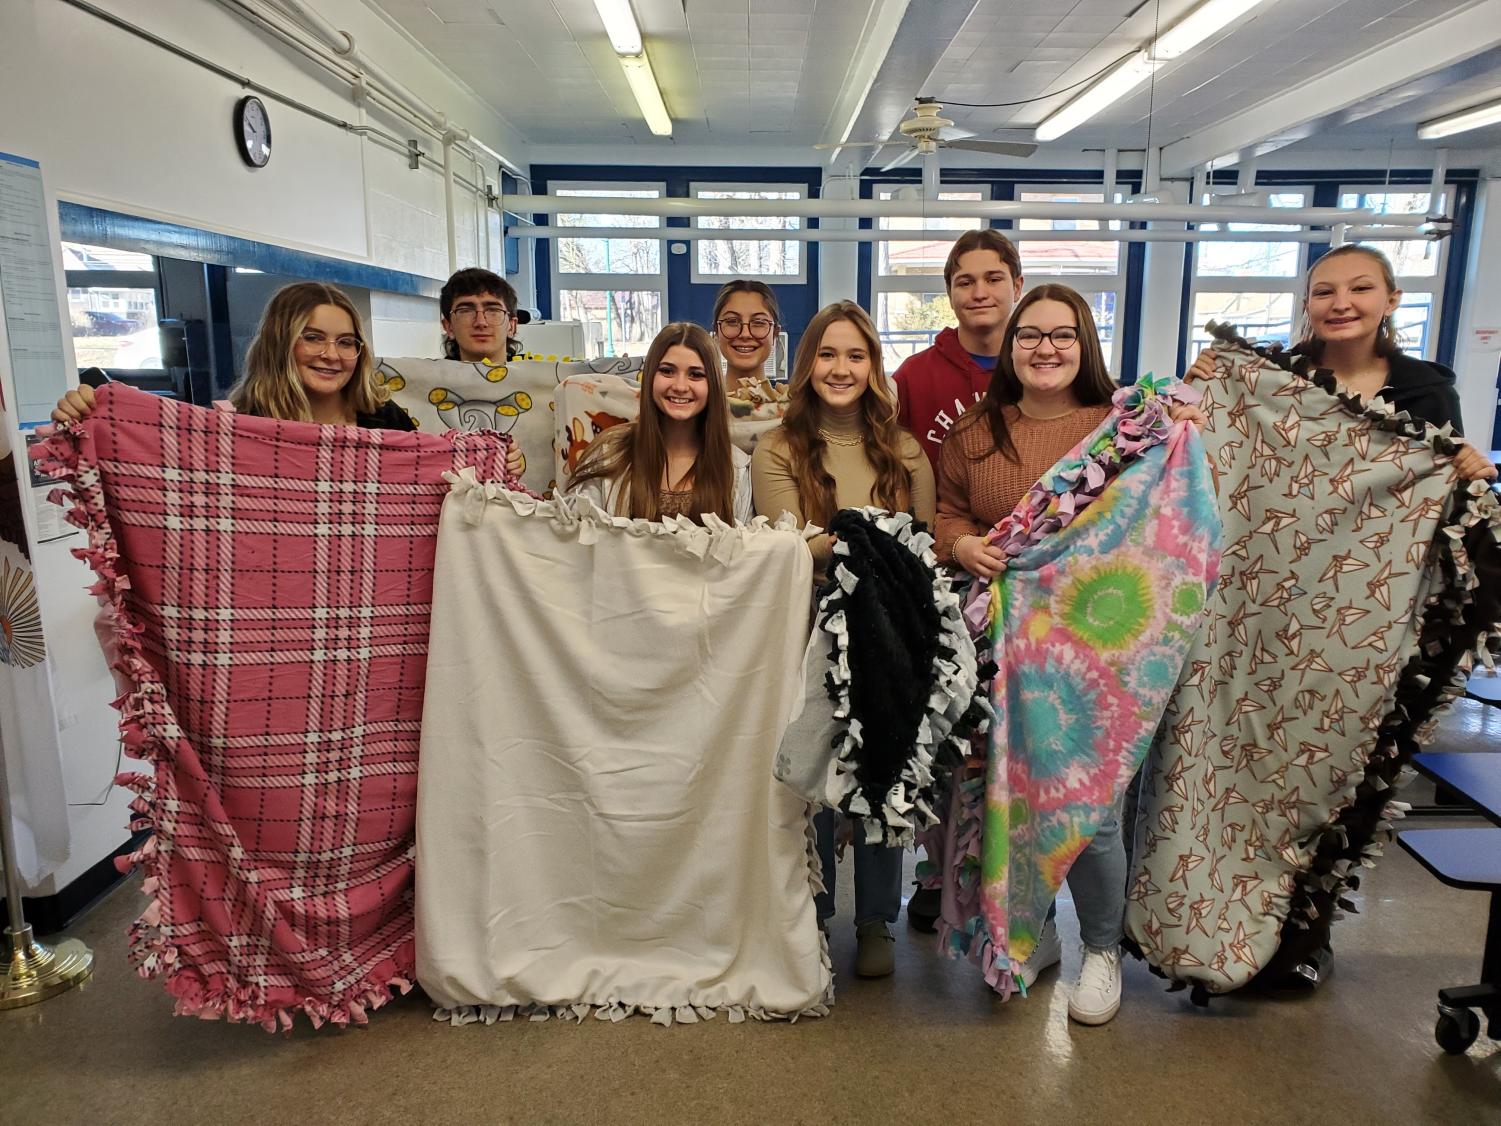 Members holding the blankets that were donated to the Health Department